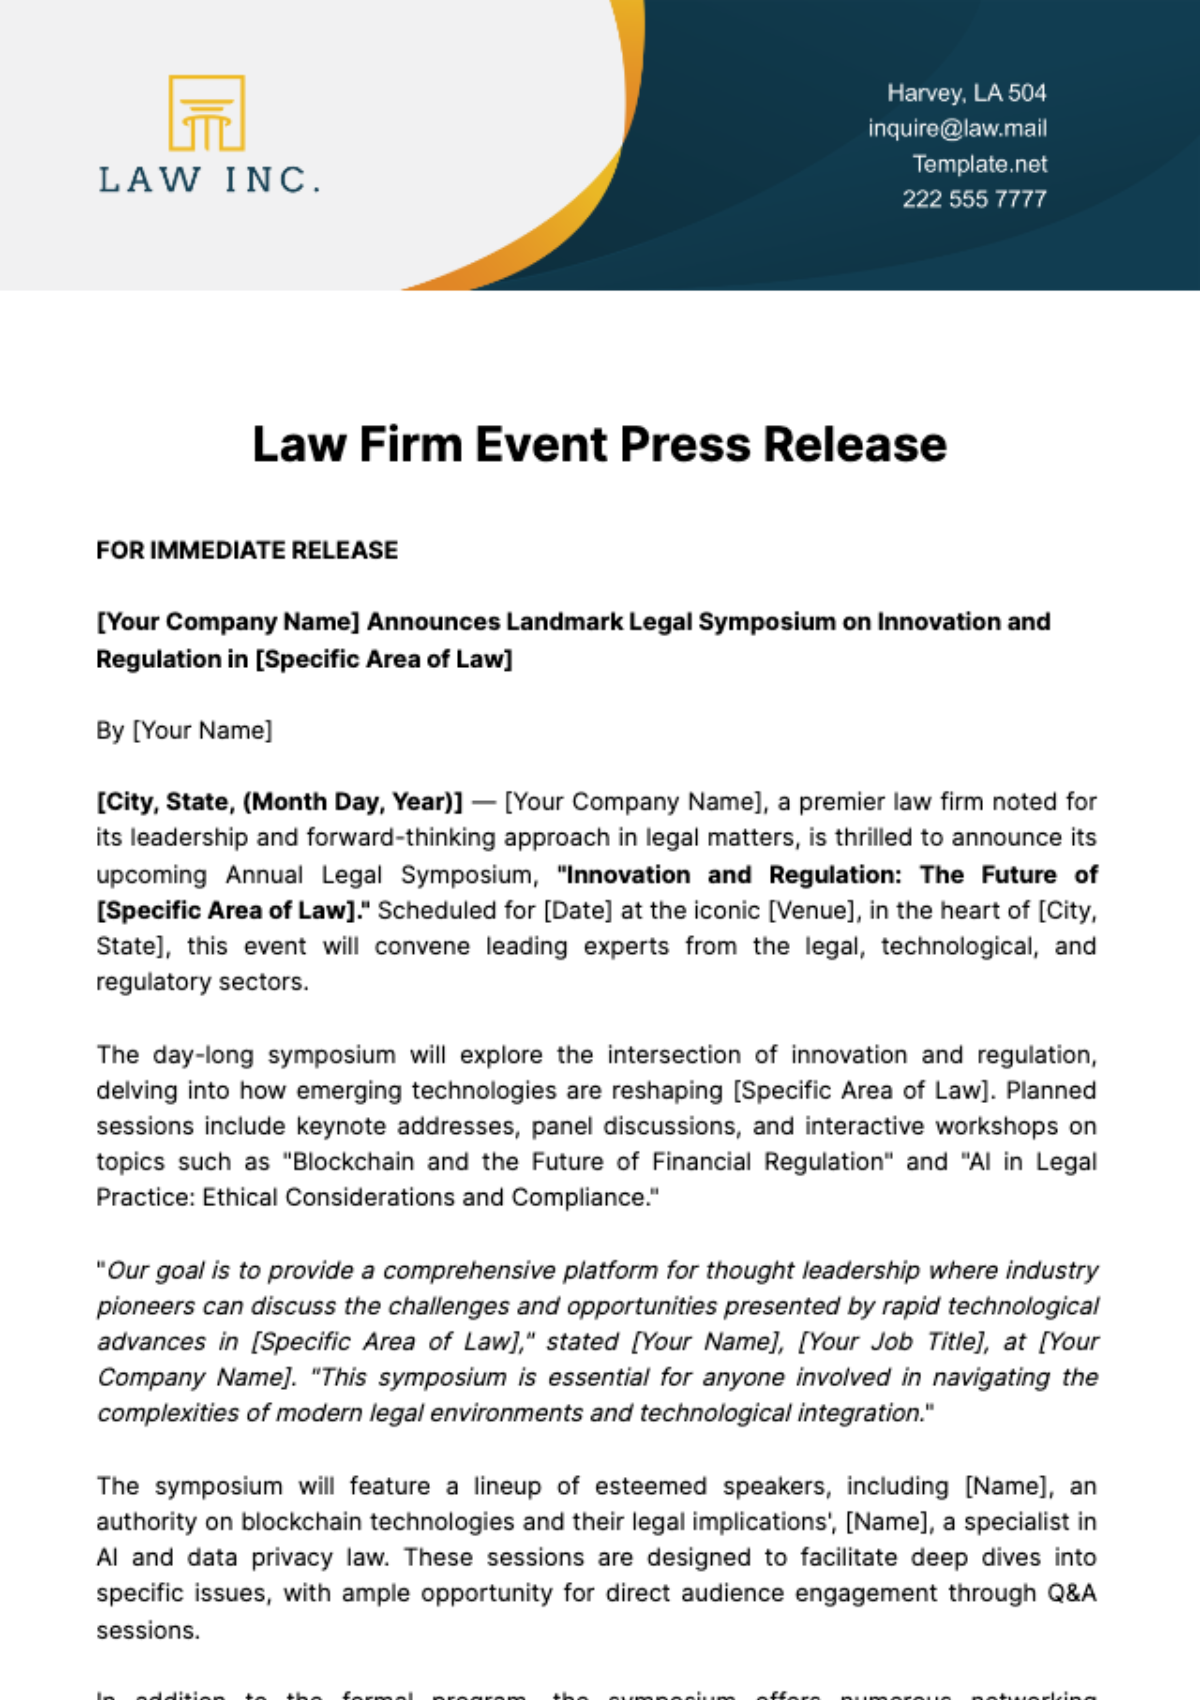 Free Law Firm Event Press Release Template